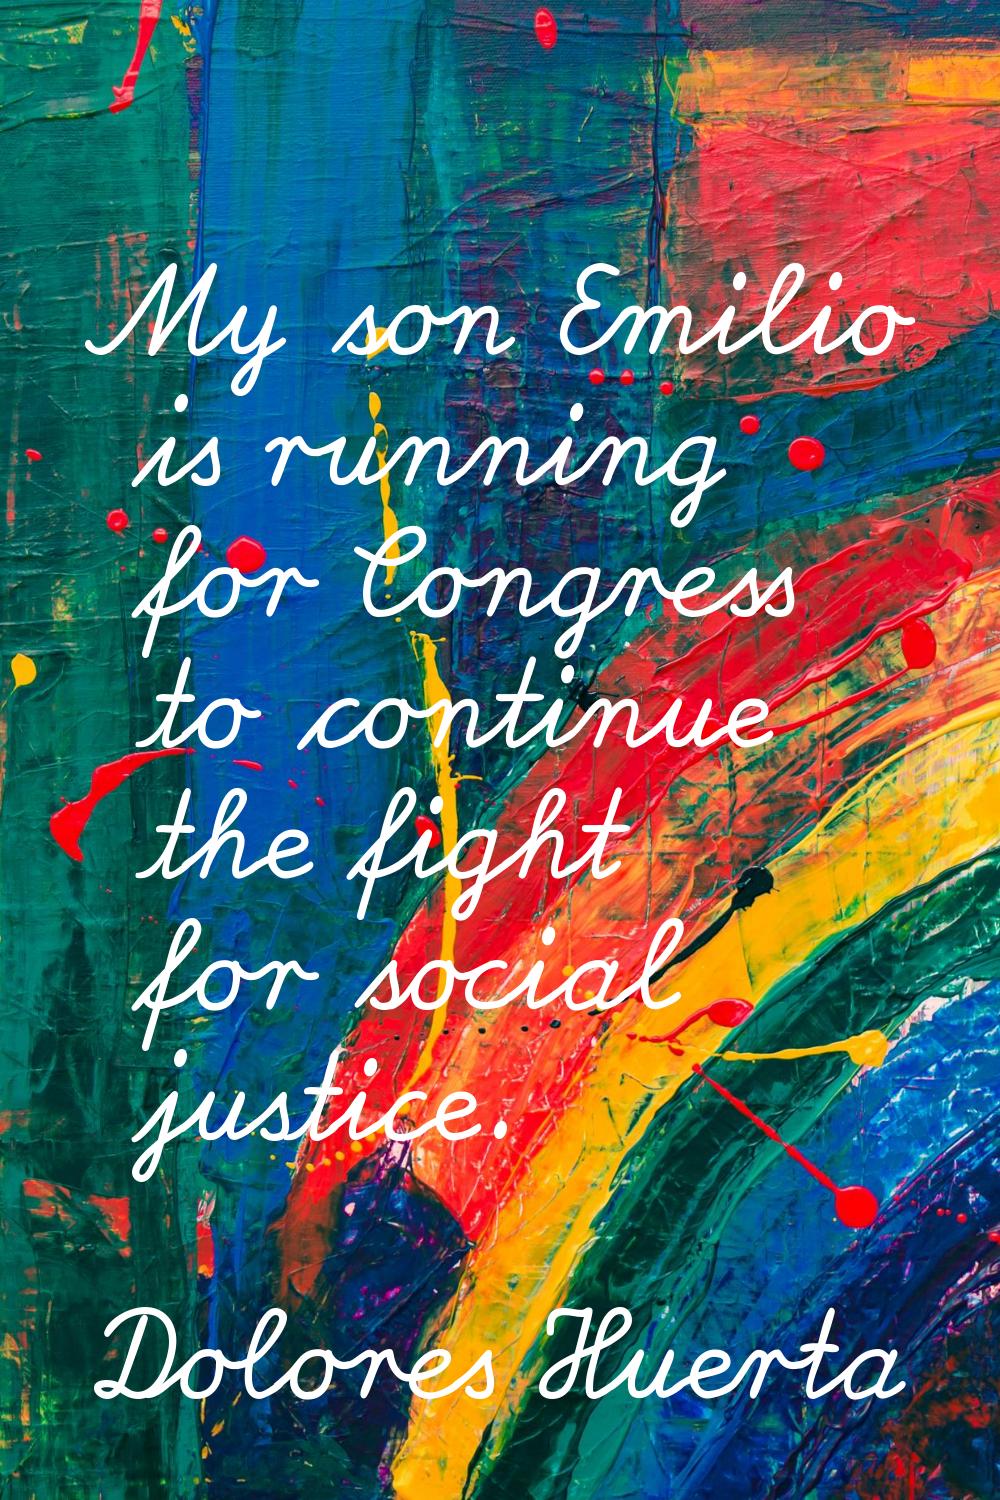 My son Emilio is running for Congress to continue the fight for social justice.